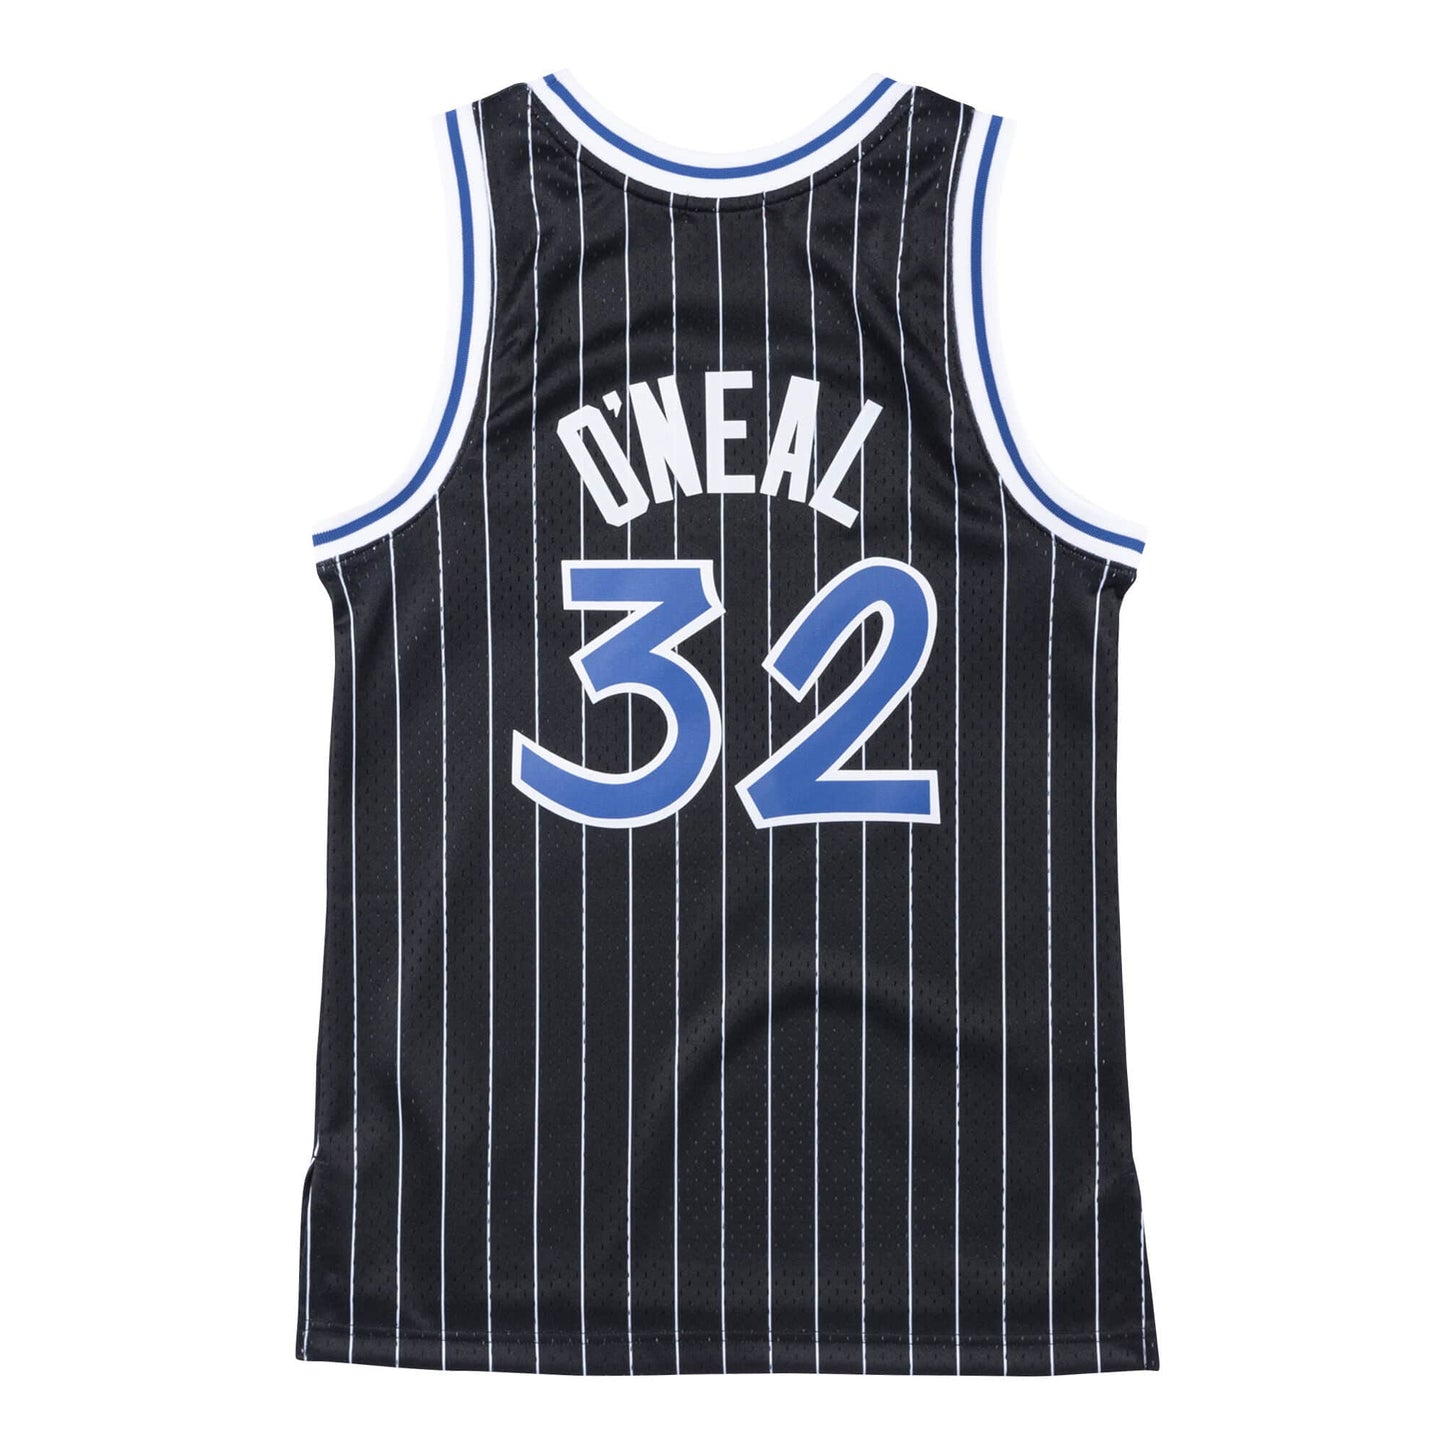 Mitchell & Ness NBA JERSEY LOS ANGELES LAKERS #34